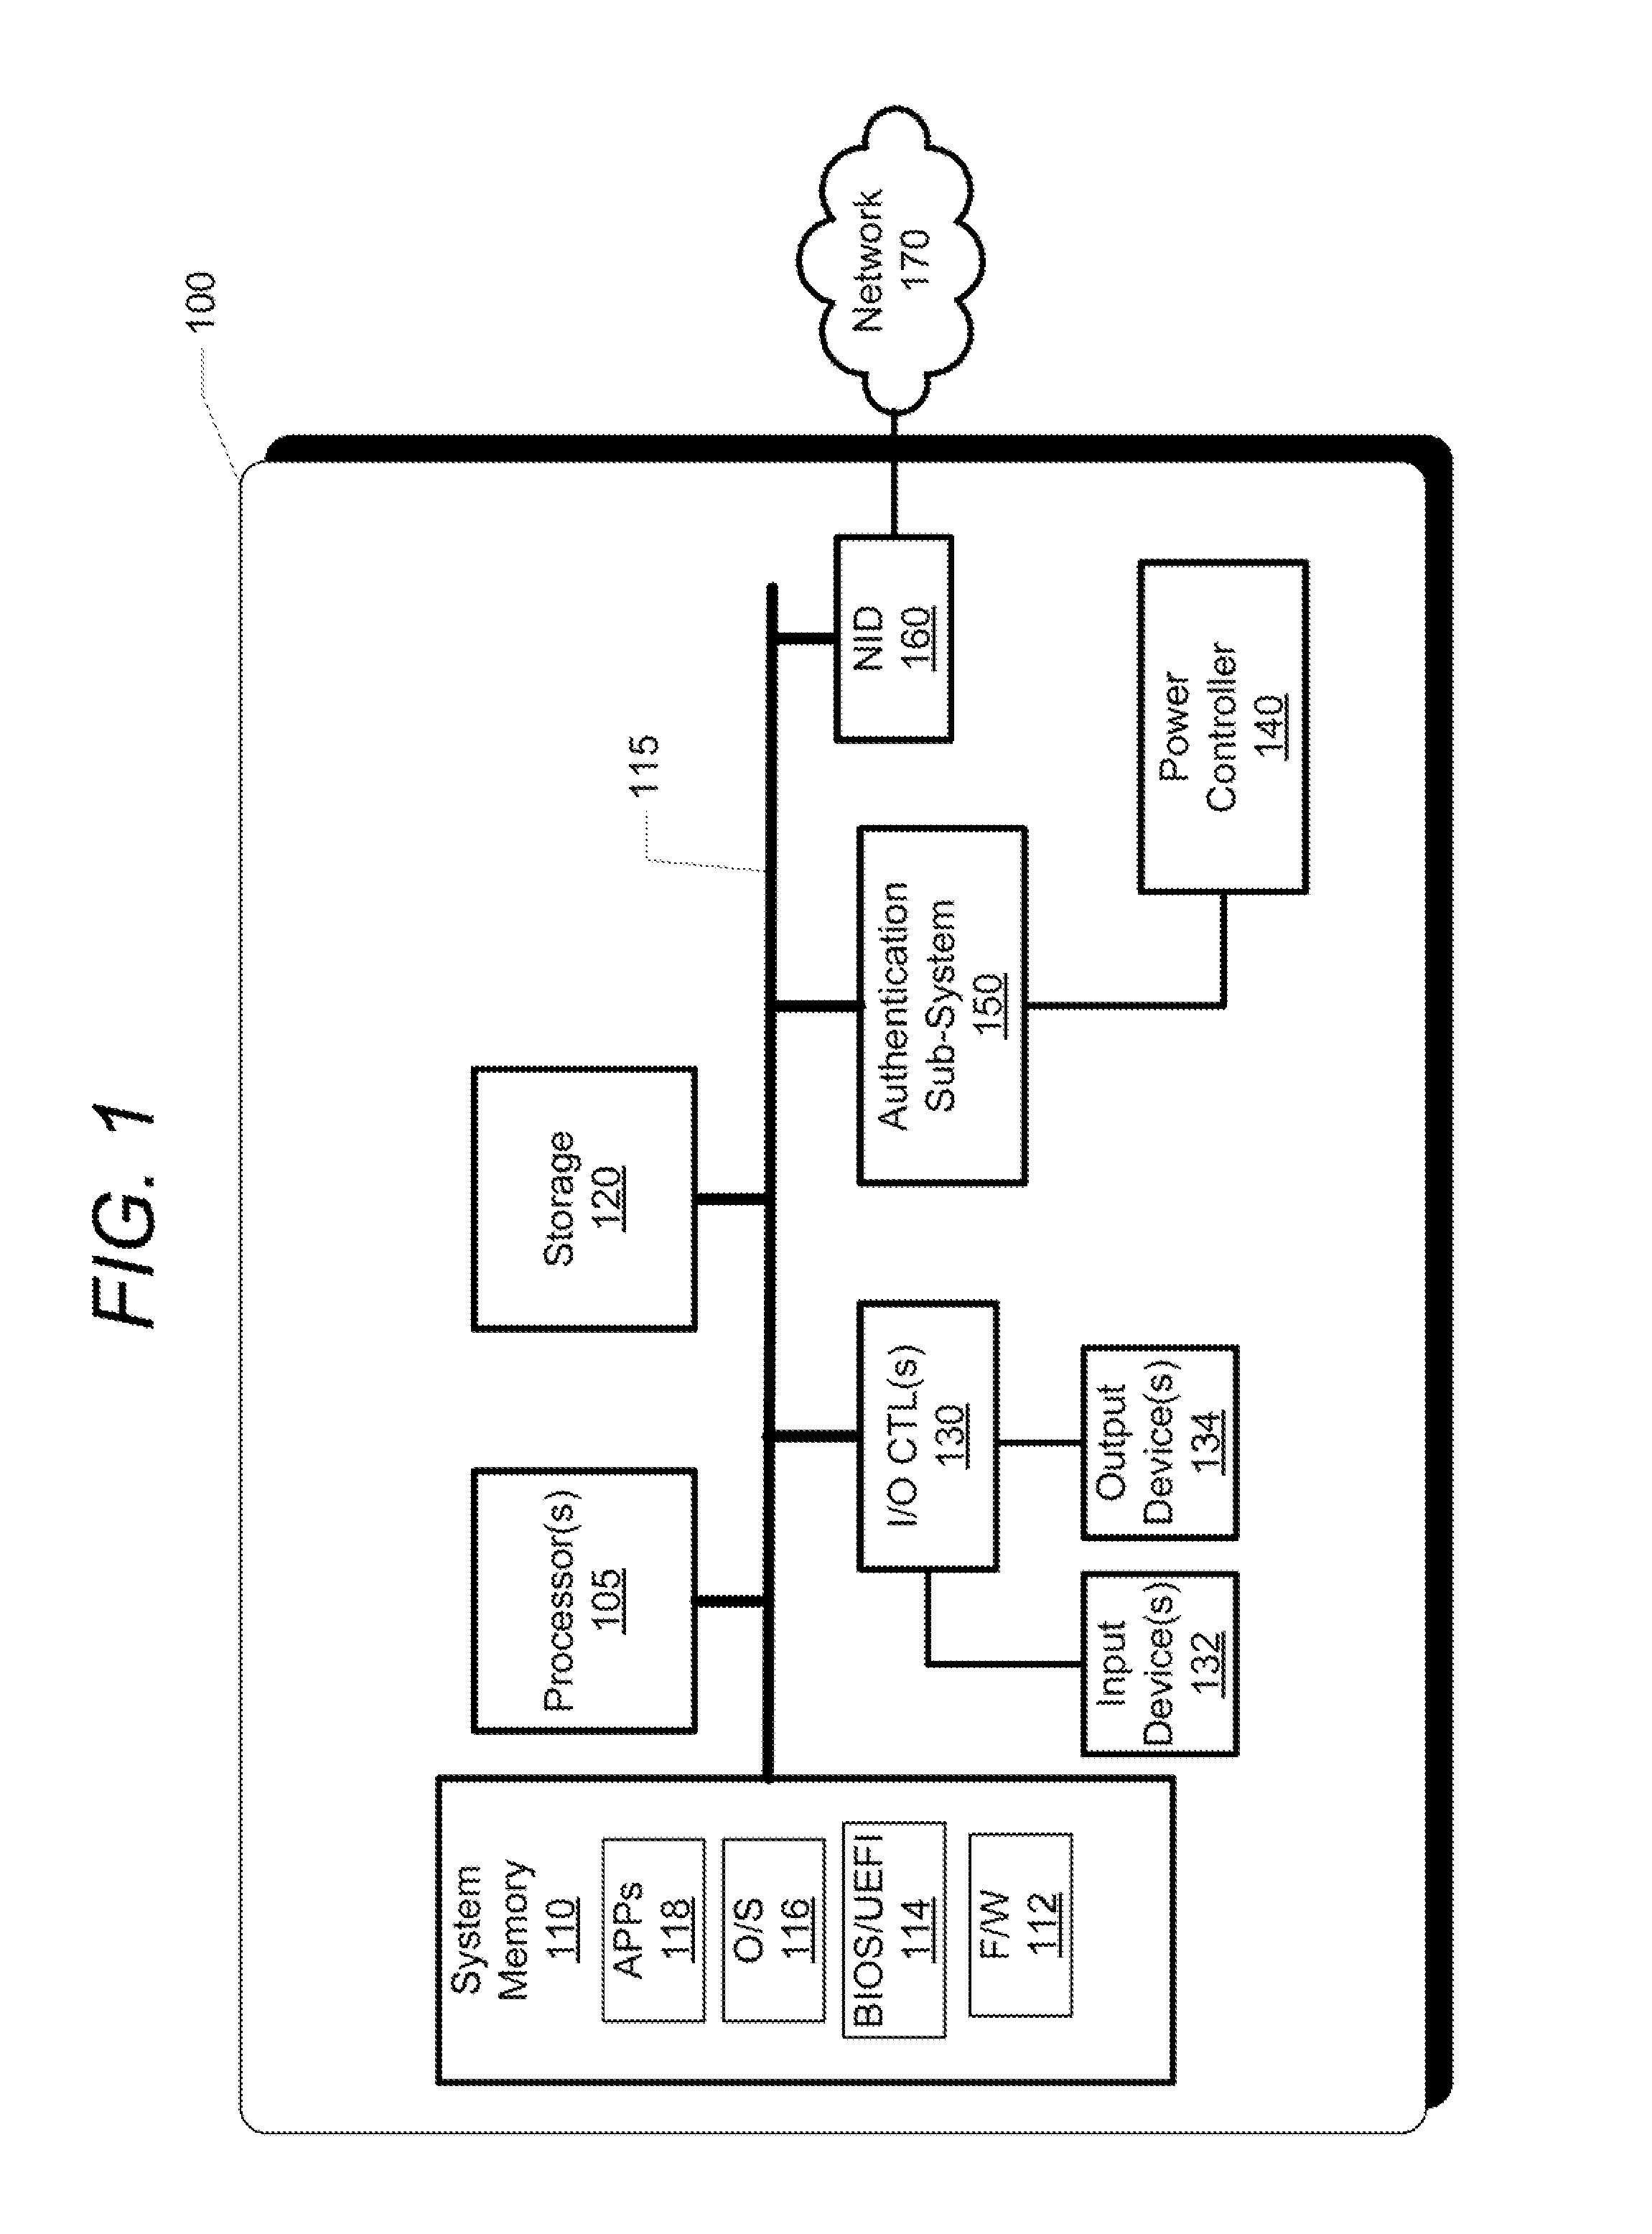 Apparatus and Method for Enabling Fingerprint-Based Secure Access to a User-Authenticated Operational State of an Information Handling System